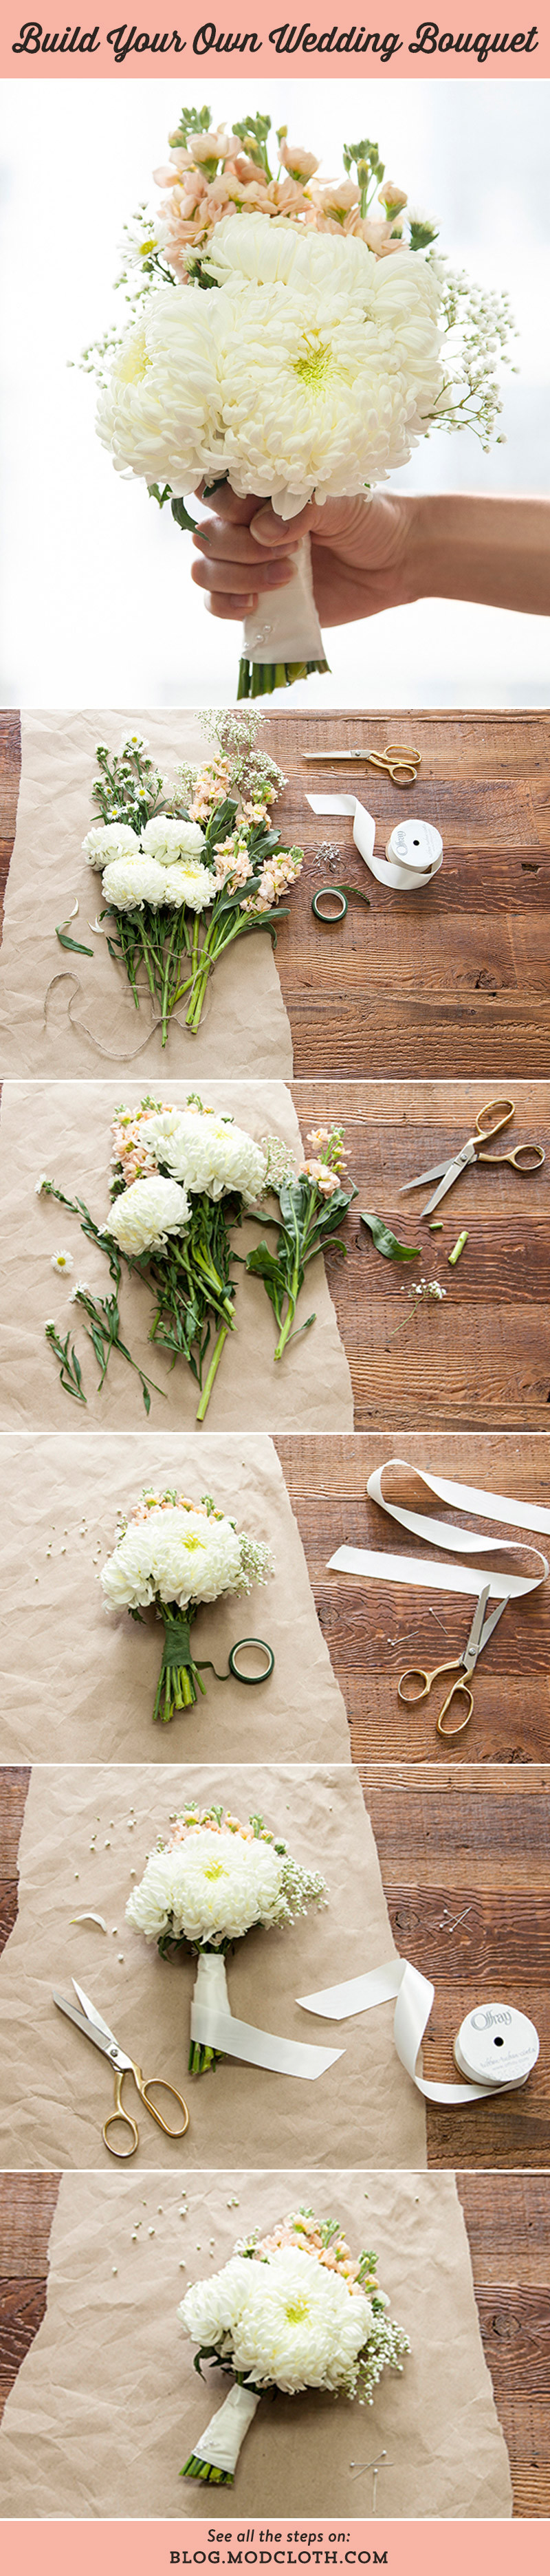 DIY Wedding Flowers
 Build Your Own Wedding Bouquet With This Easy DIY